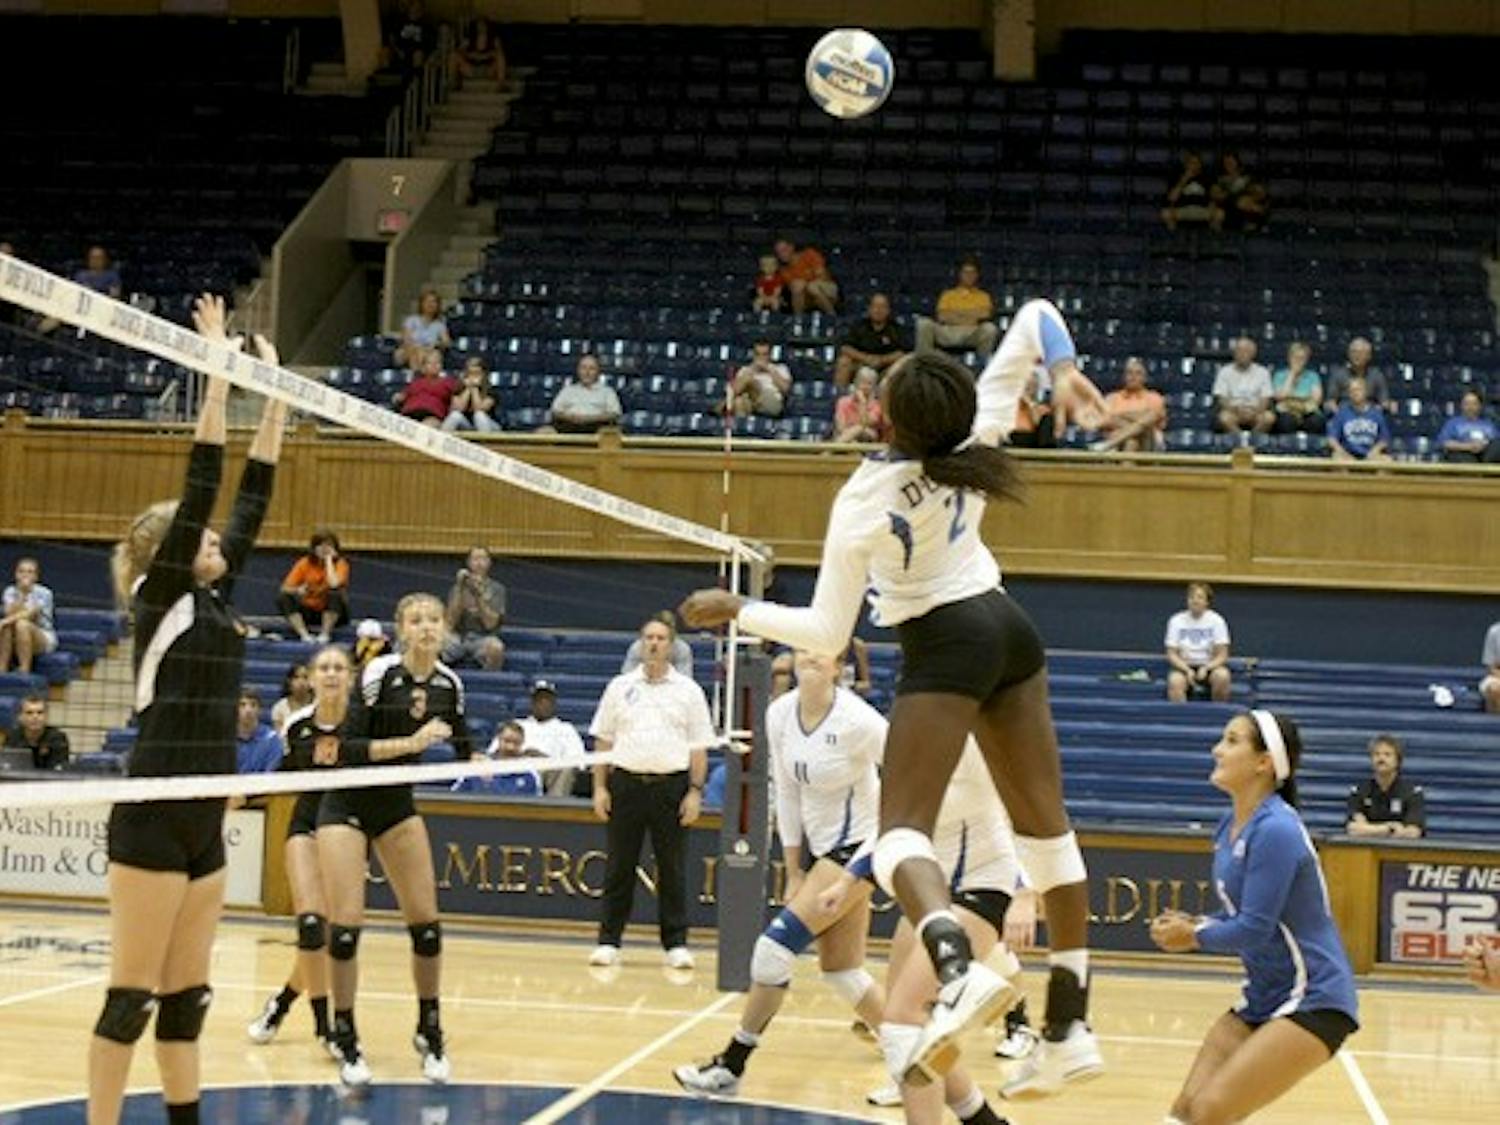 Jeme Obeime leads the Blue Devils with 102 kills this season.